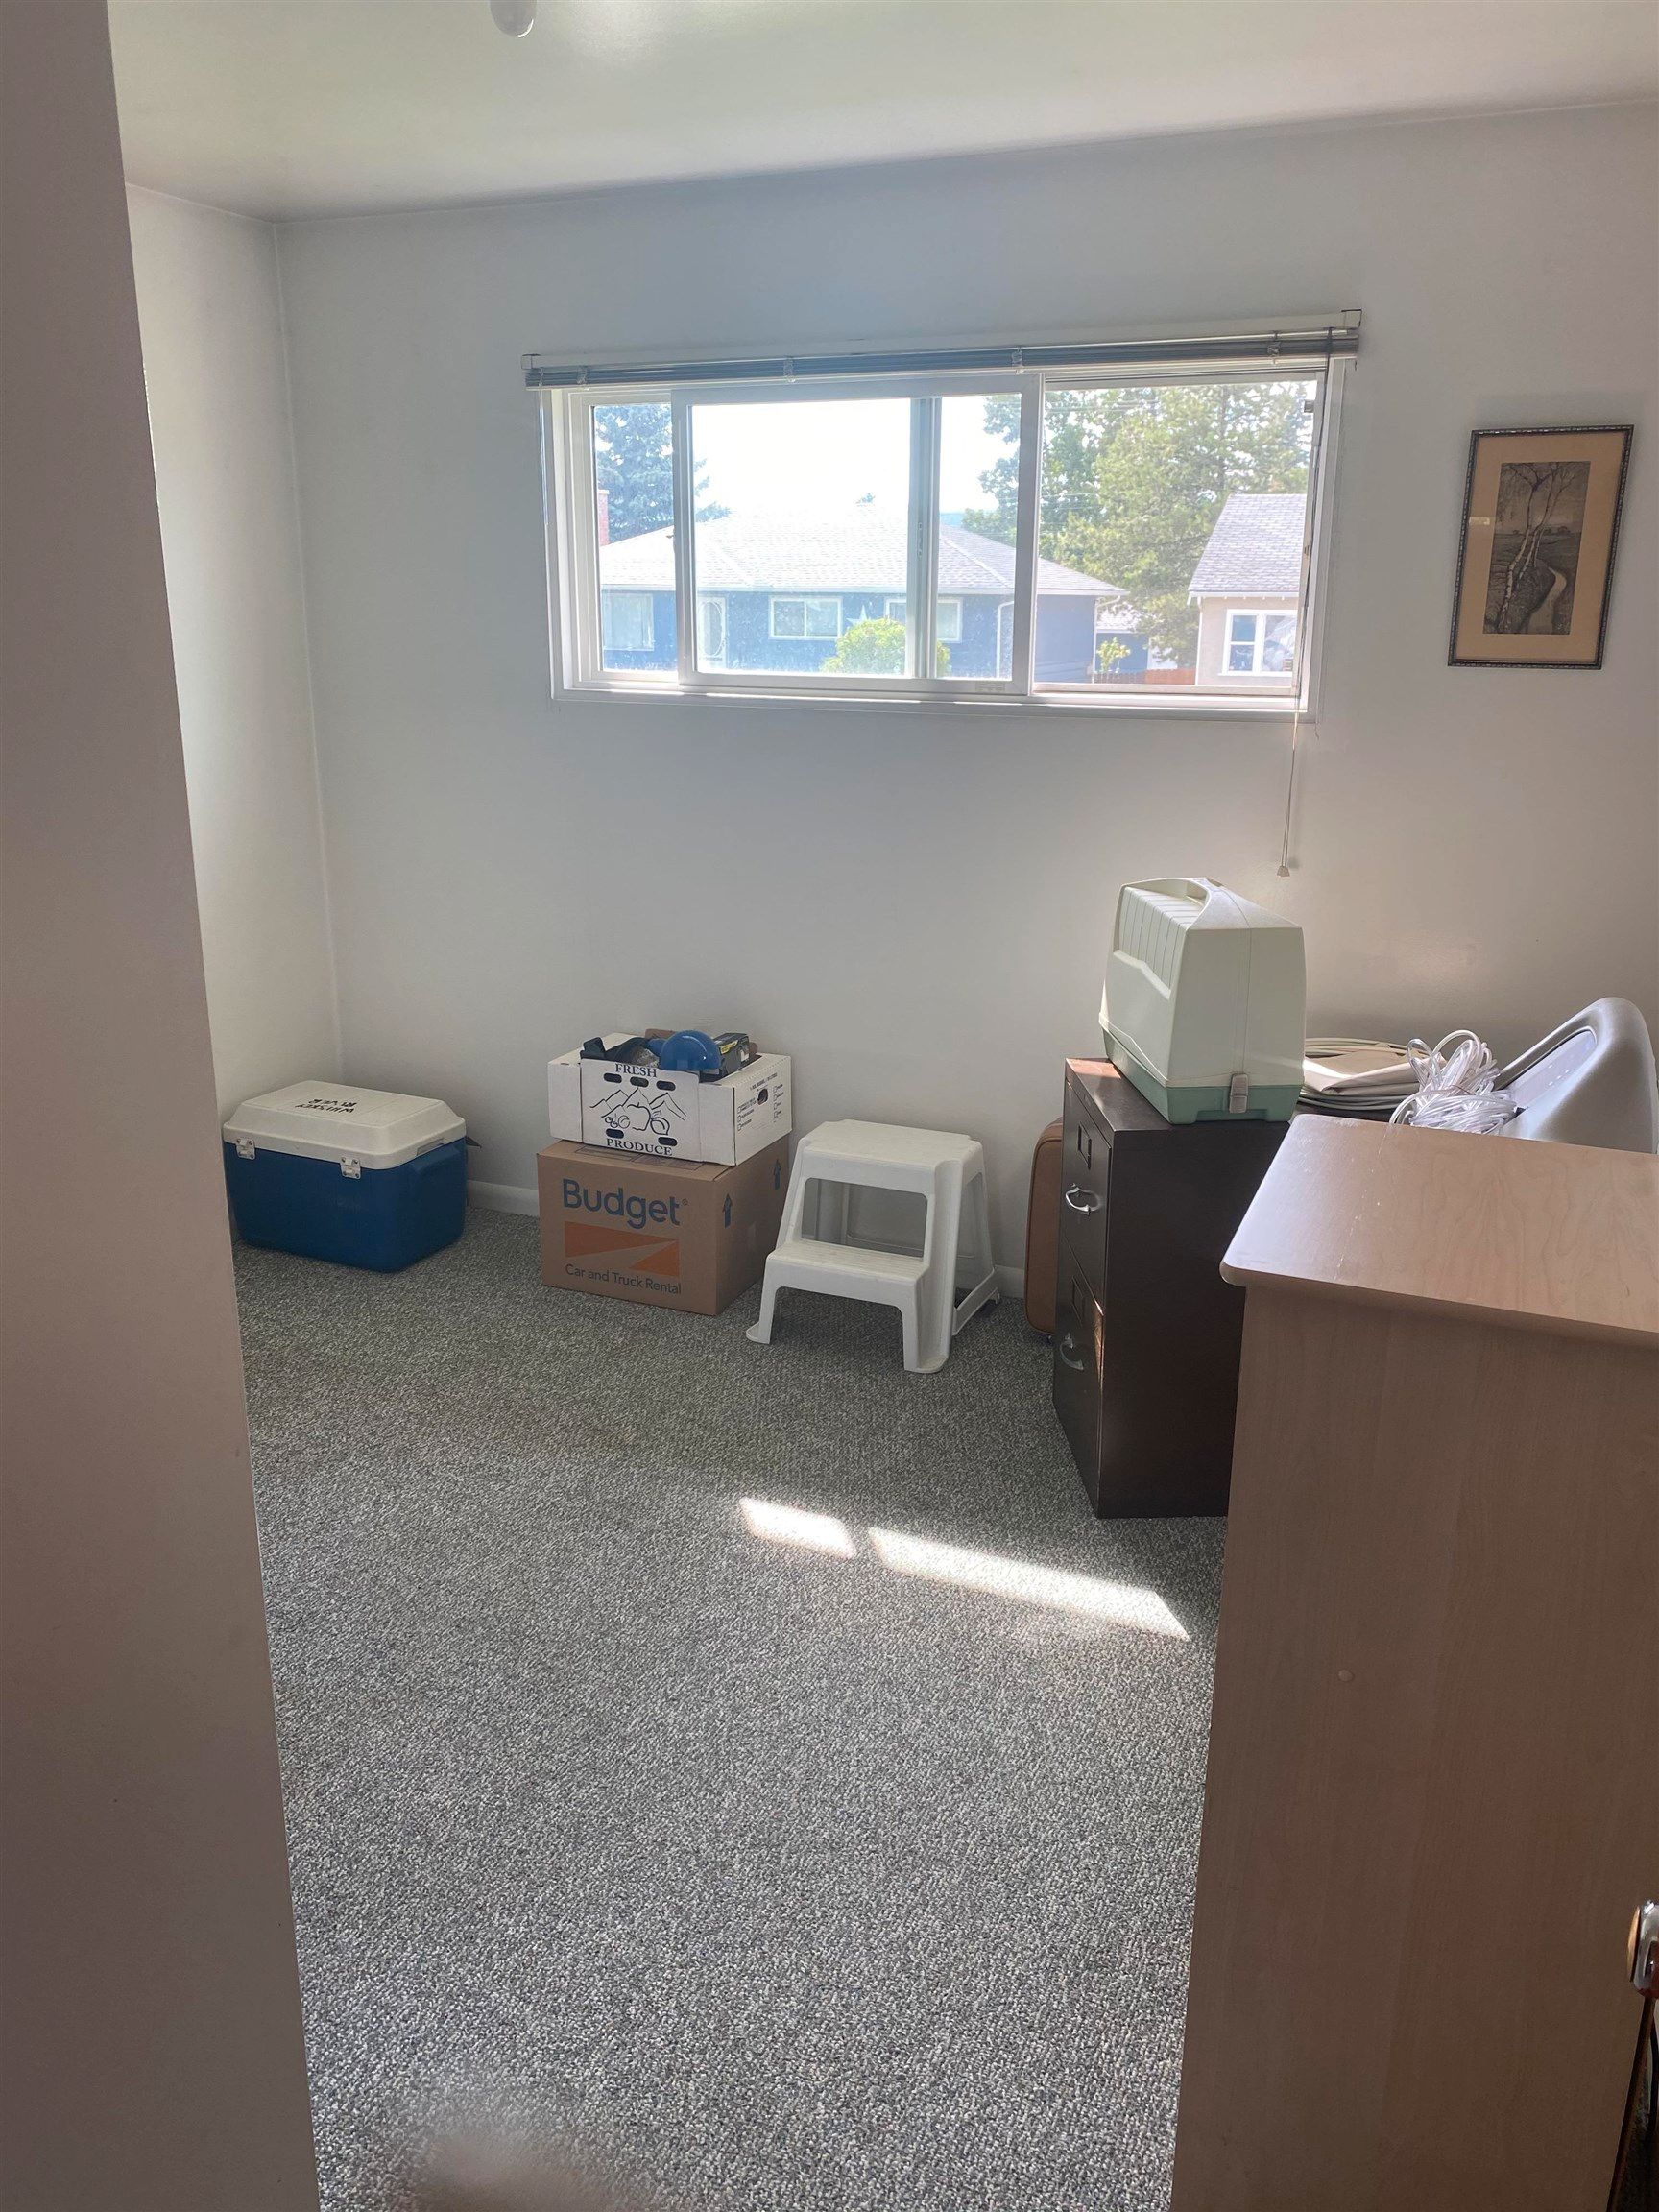 Photo 13: Photos: 346 - 352 CARNEY Street in Prince George: Central Duplex for sale (PG City Central (Zone 72))  : MLS®# R2609479